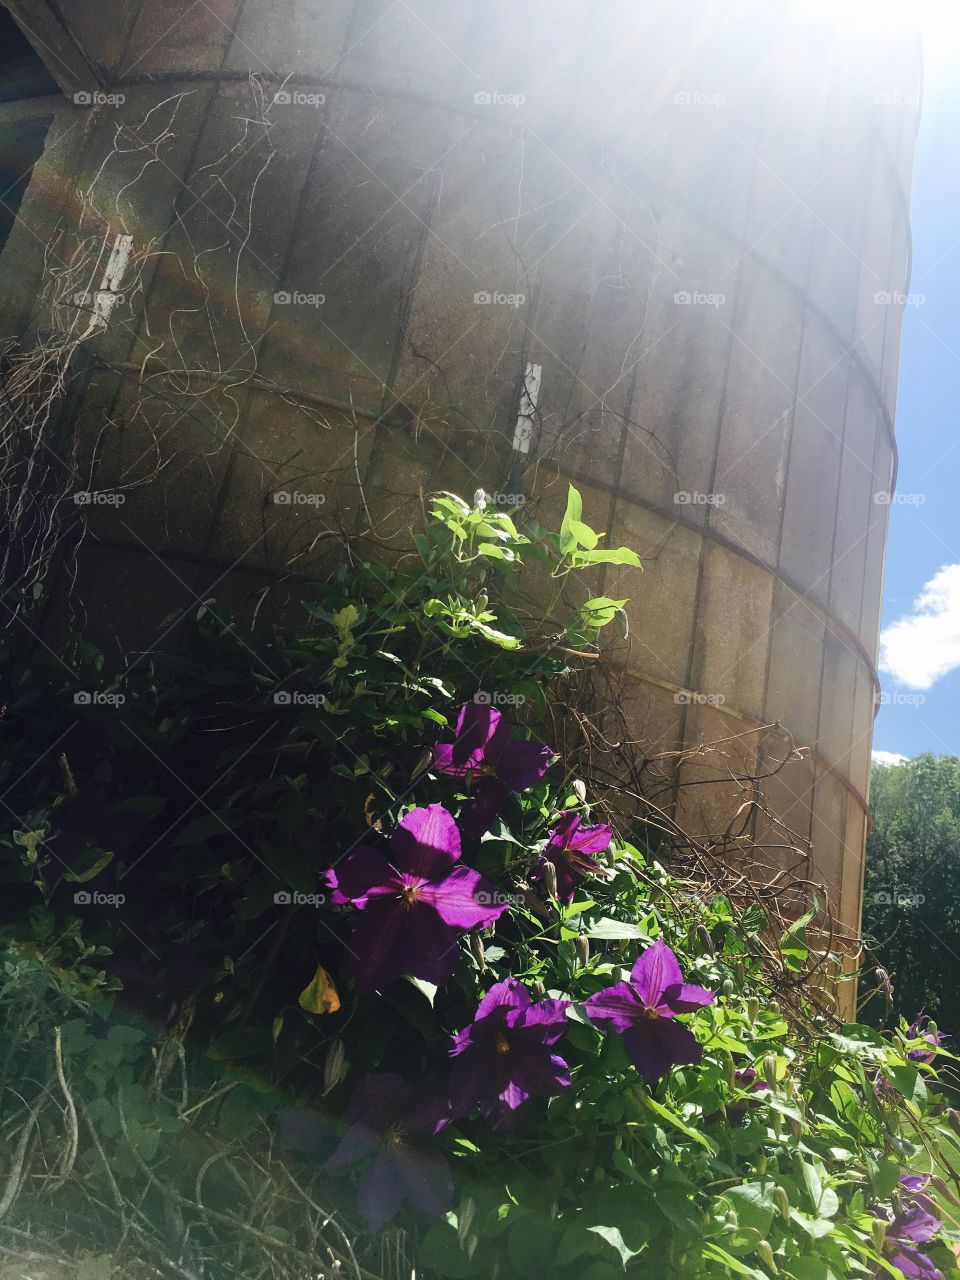 Old silo, new flowers